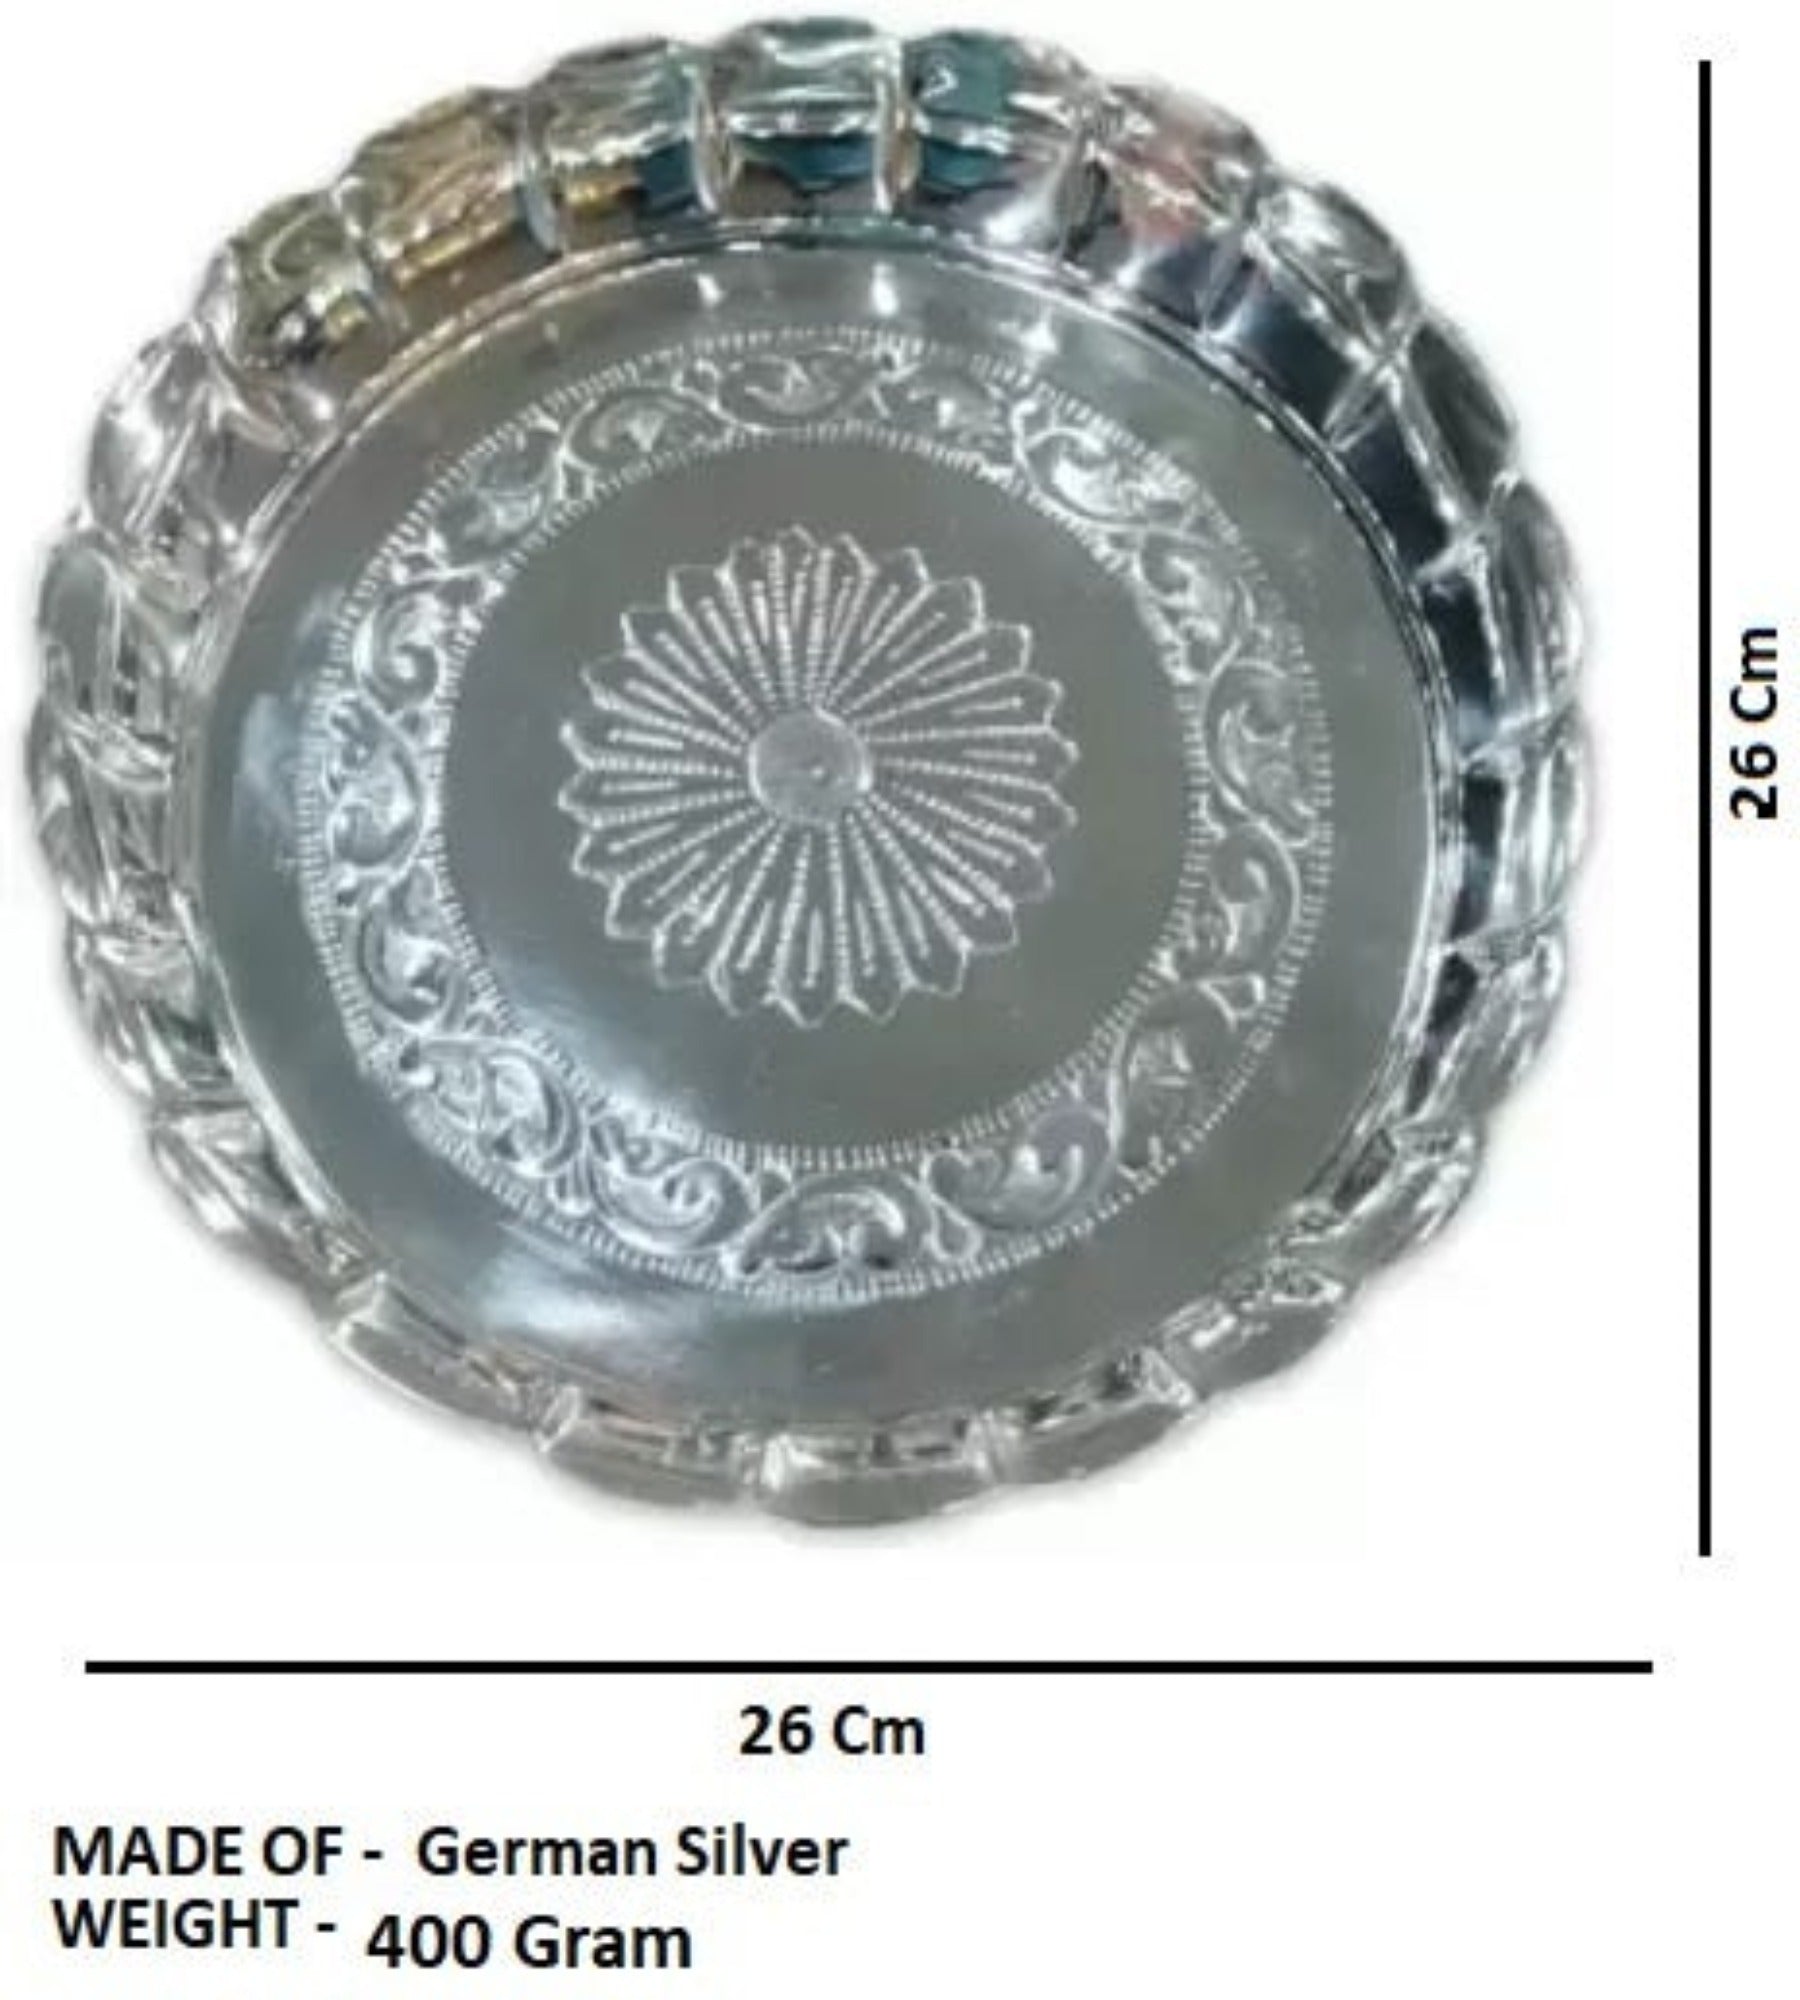 German Silver 10 Inch Floral Design Plate With Stand for Home Pooja Decor K3127